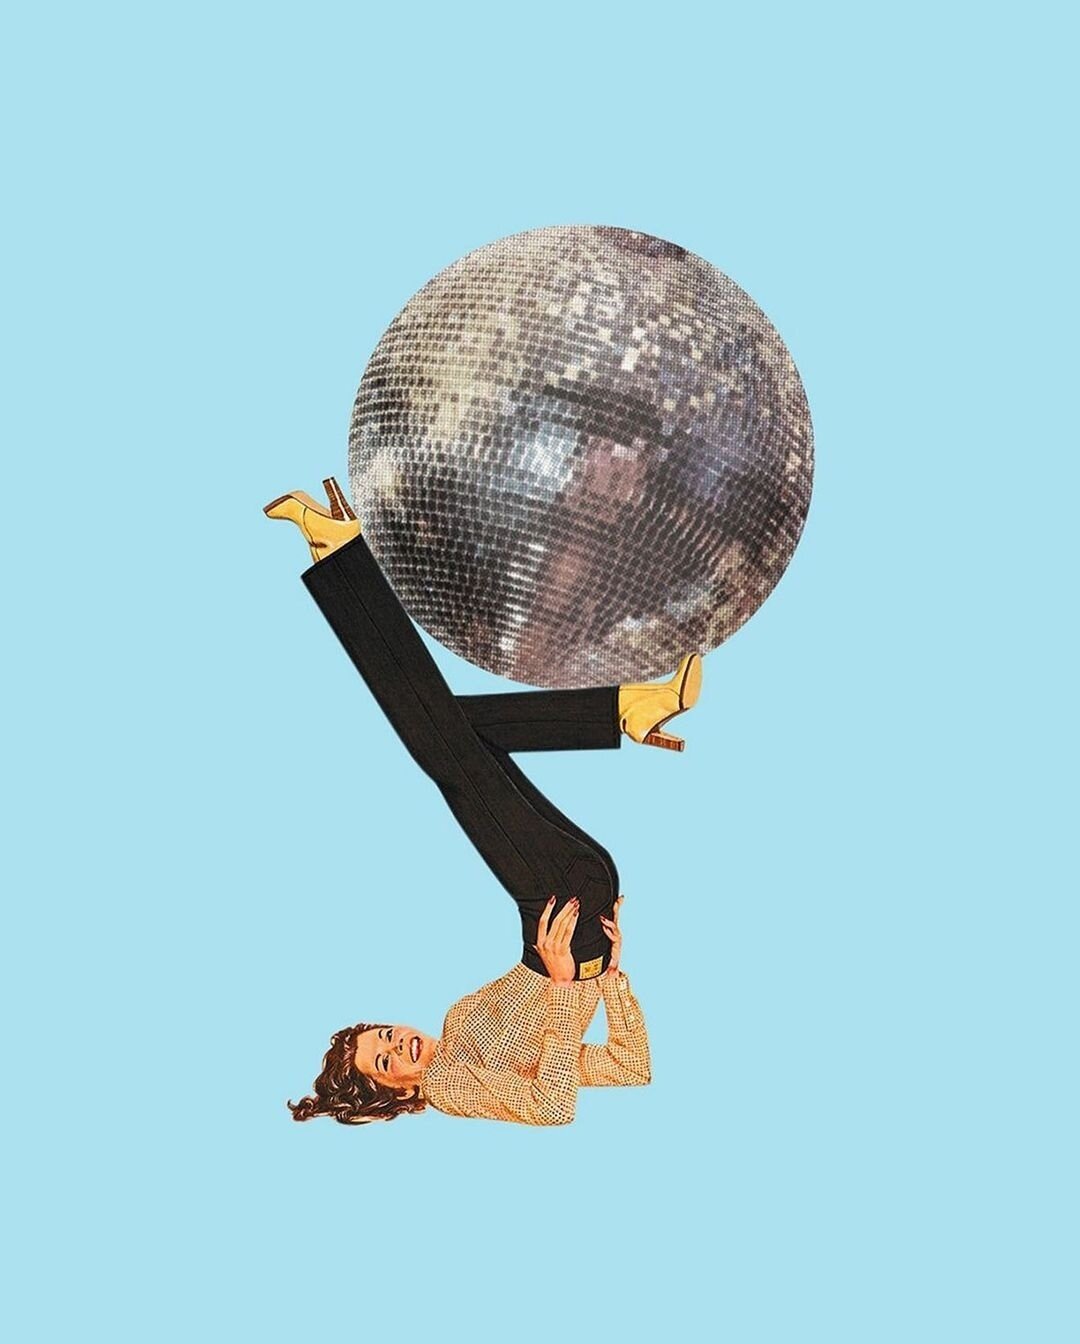 It's that time of year where all I want to do is look at the disco ball artwork by @juliawalck!